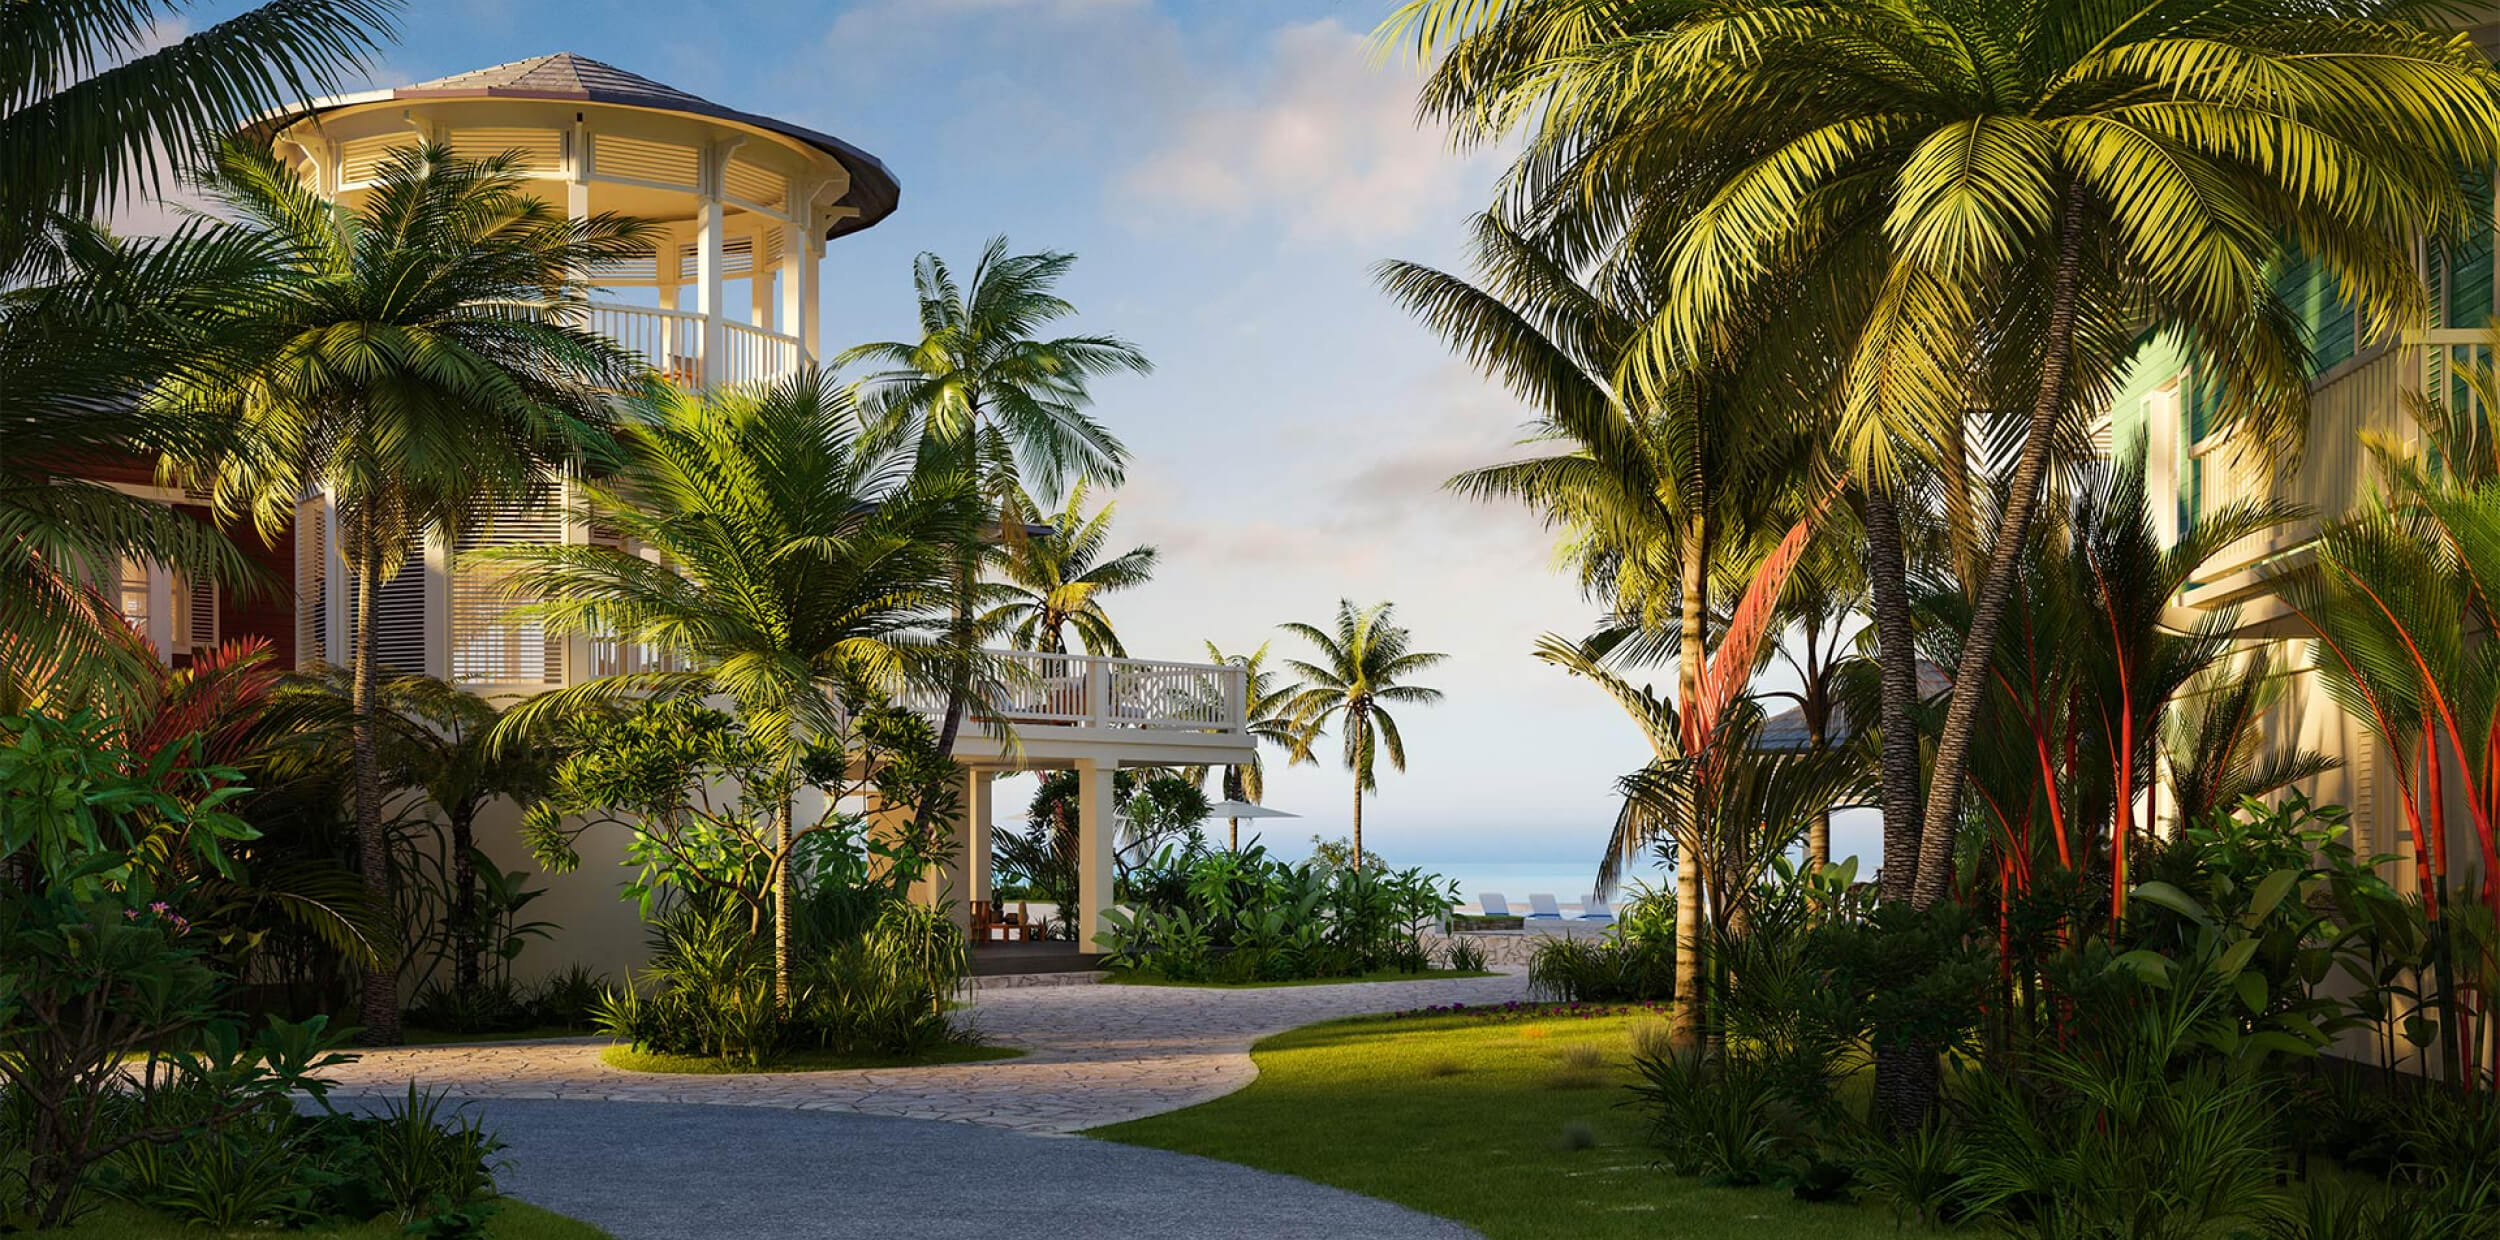 Beachfront paradise property at The Abaco Club among palm trees